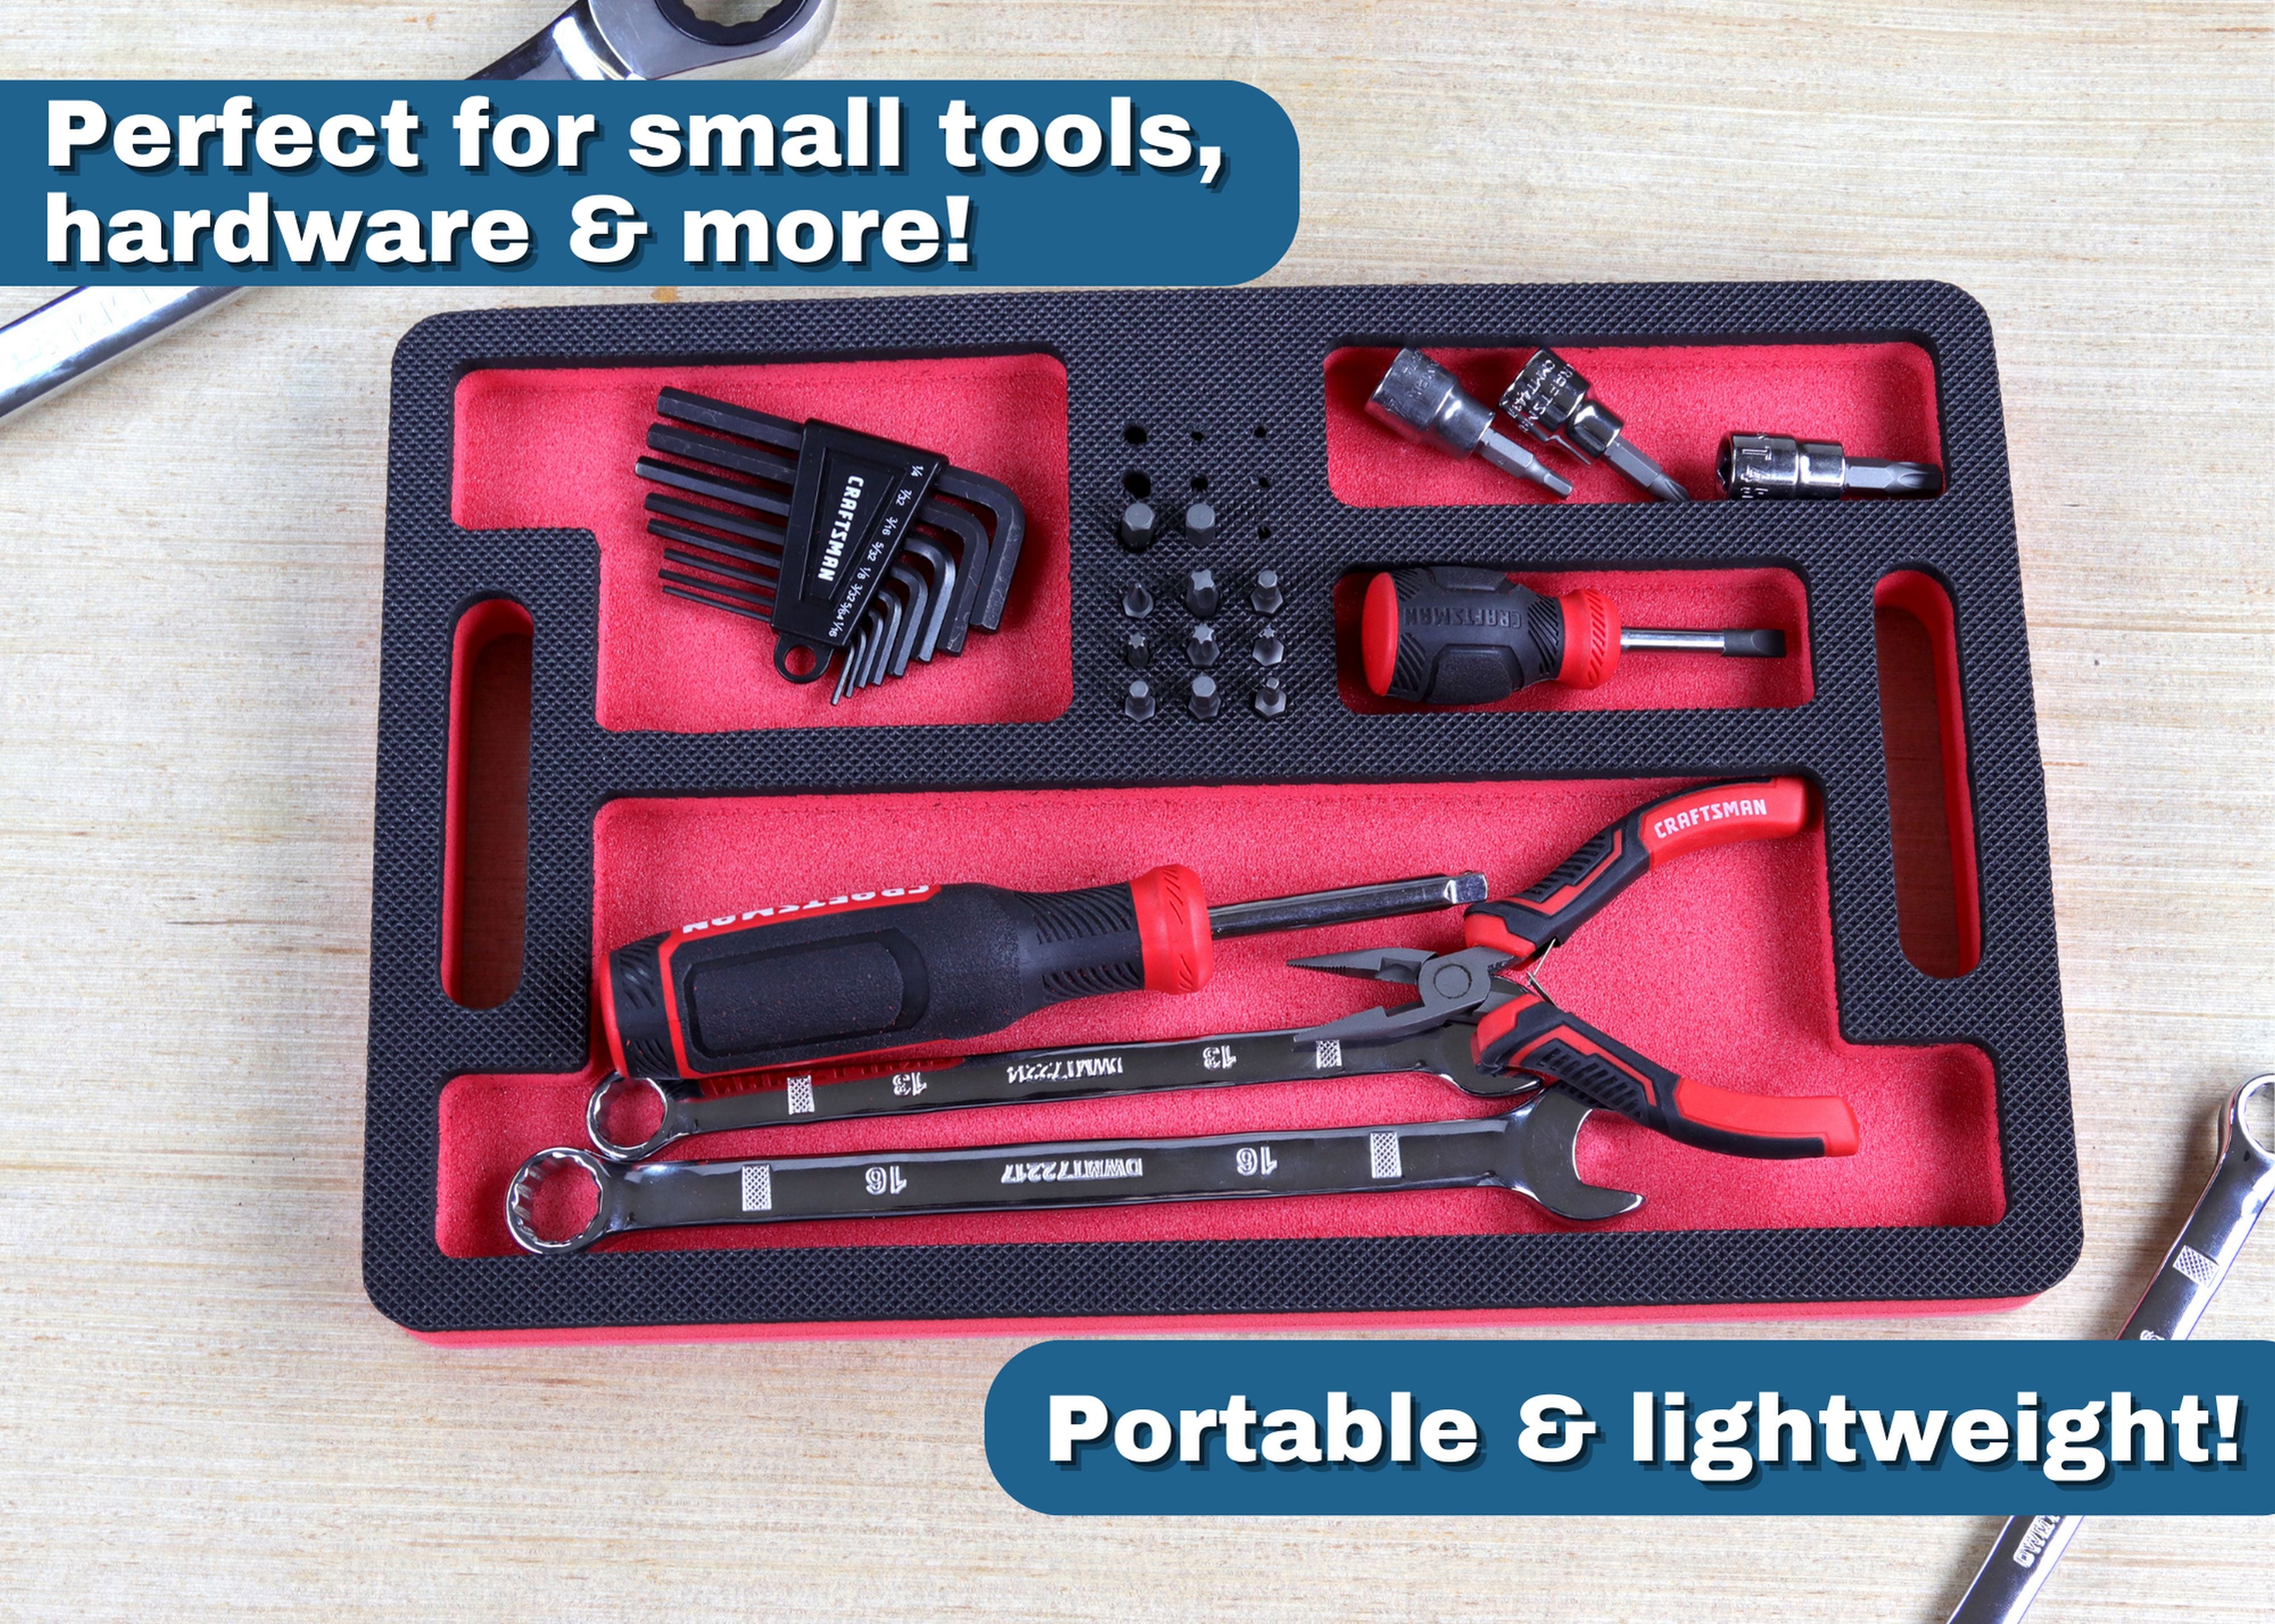 Tool Work Tray Organizer Red and Black Durable Foam Non-Slip Anti-Rattle Bin Holder Drawer Insert with Handles 4 Pockets with Bit Holes Portable Home Work Garage 14 x 9 Inch